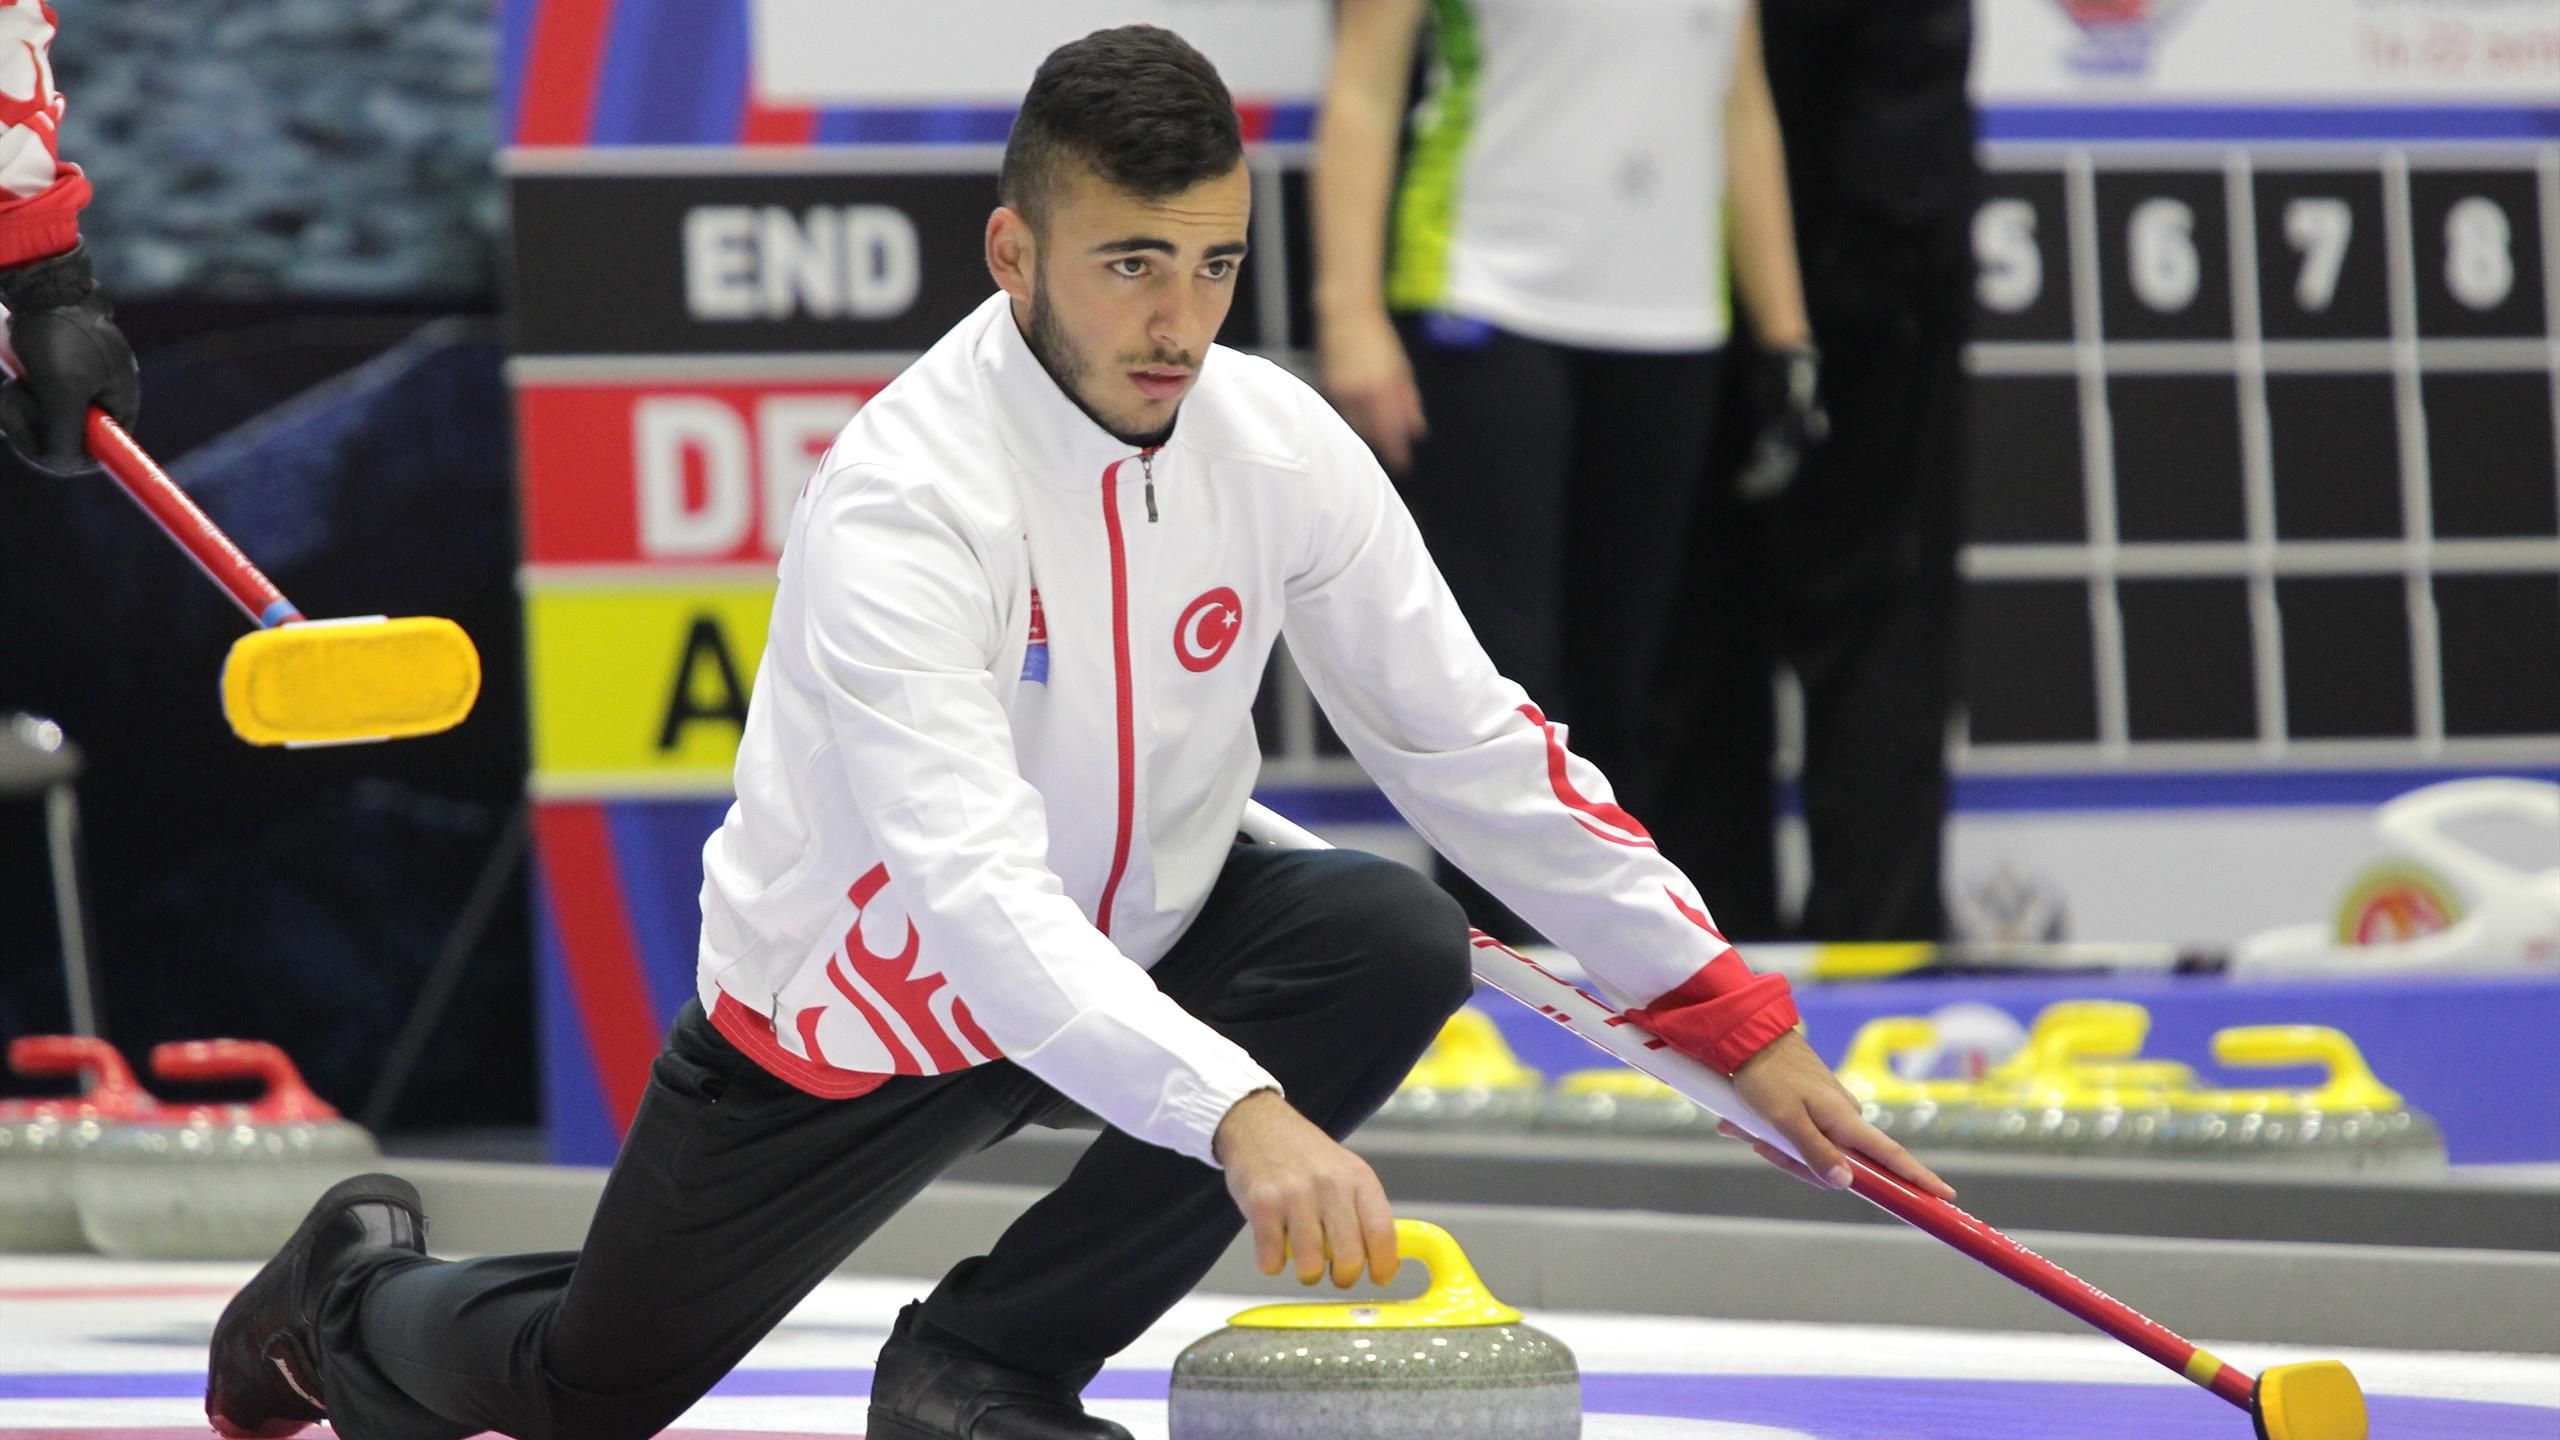 Turkey win first-ever game at Mens Curling World Championships beating New Zealand before win over Korea